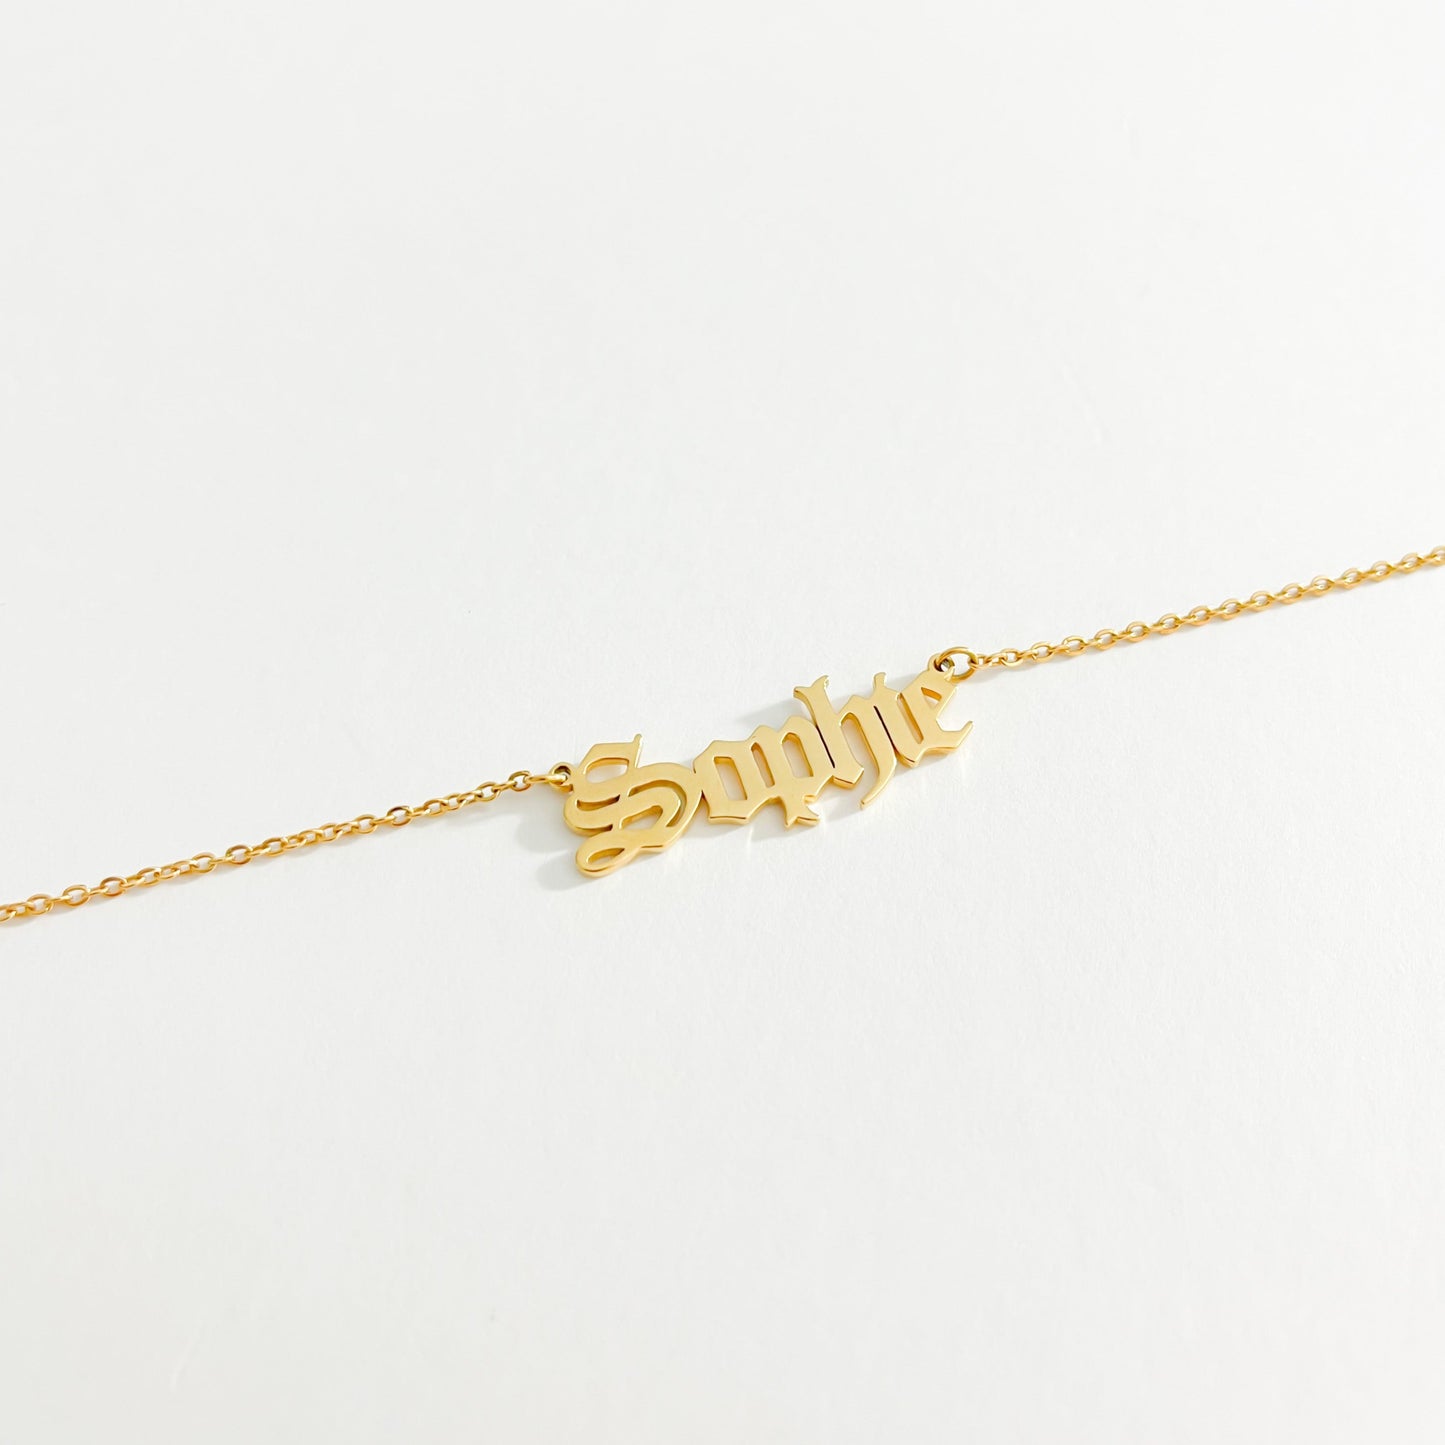 THE PERSONALISED OLD ENGLISH NAME NECKLACE